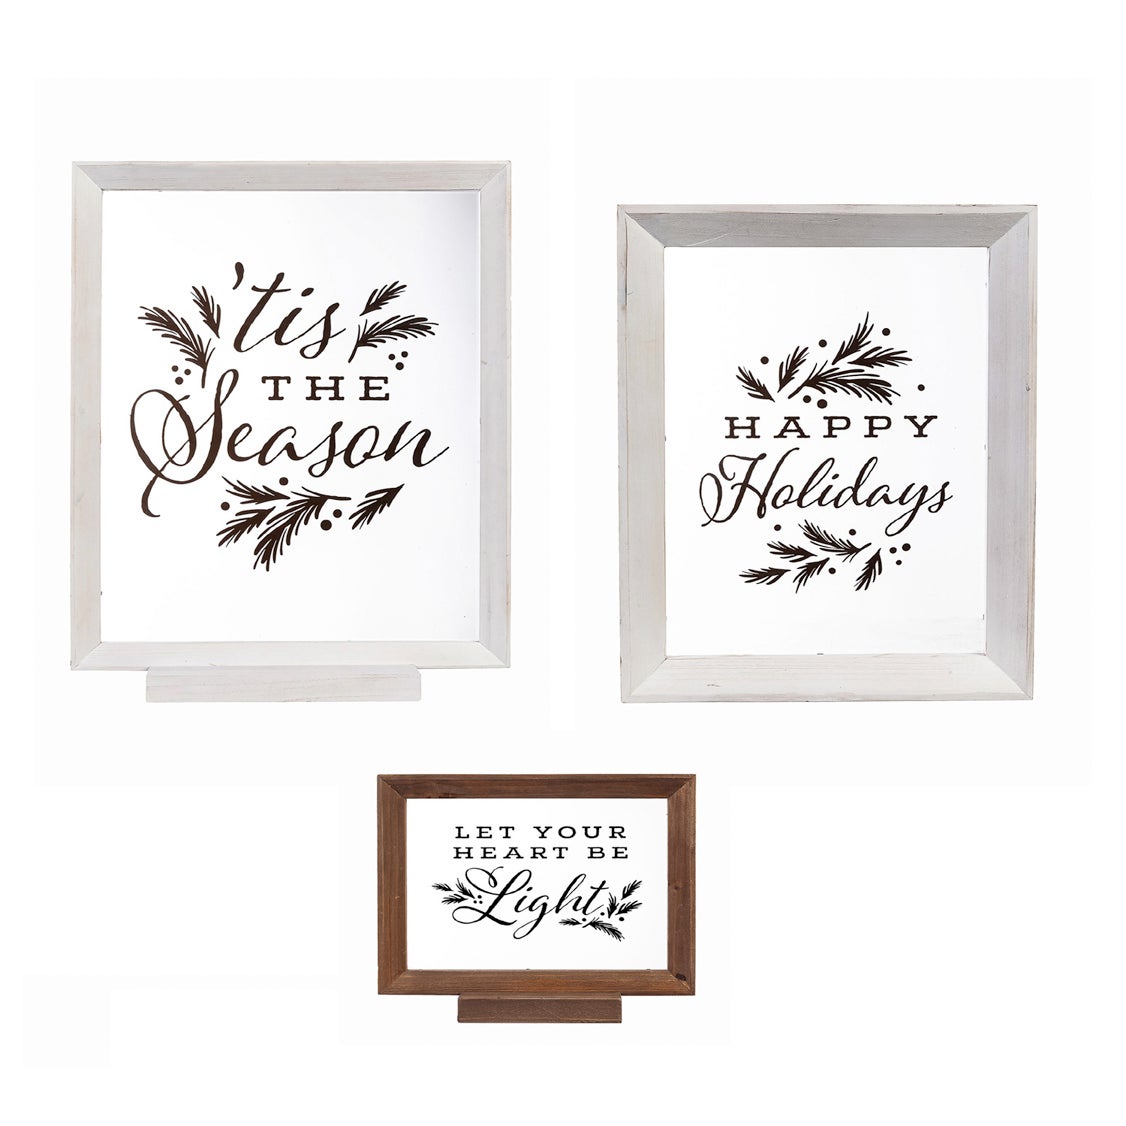 Wood Framed Decor, Set of 3"Happy Holidays"Let Your Heart Be Light"Tis the Season"